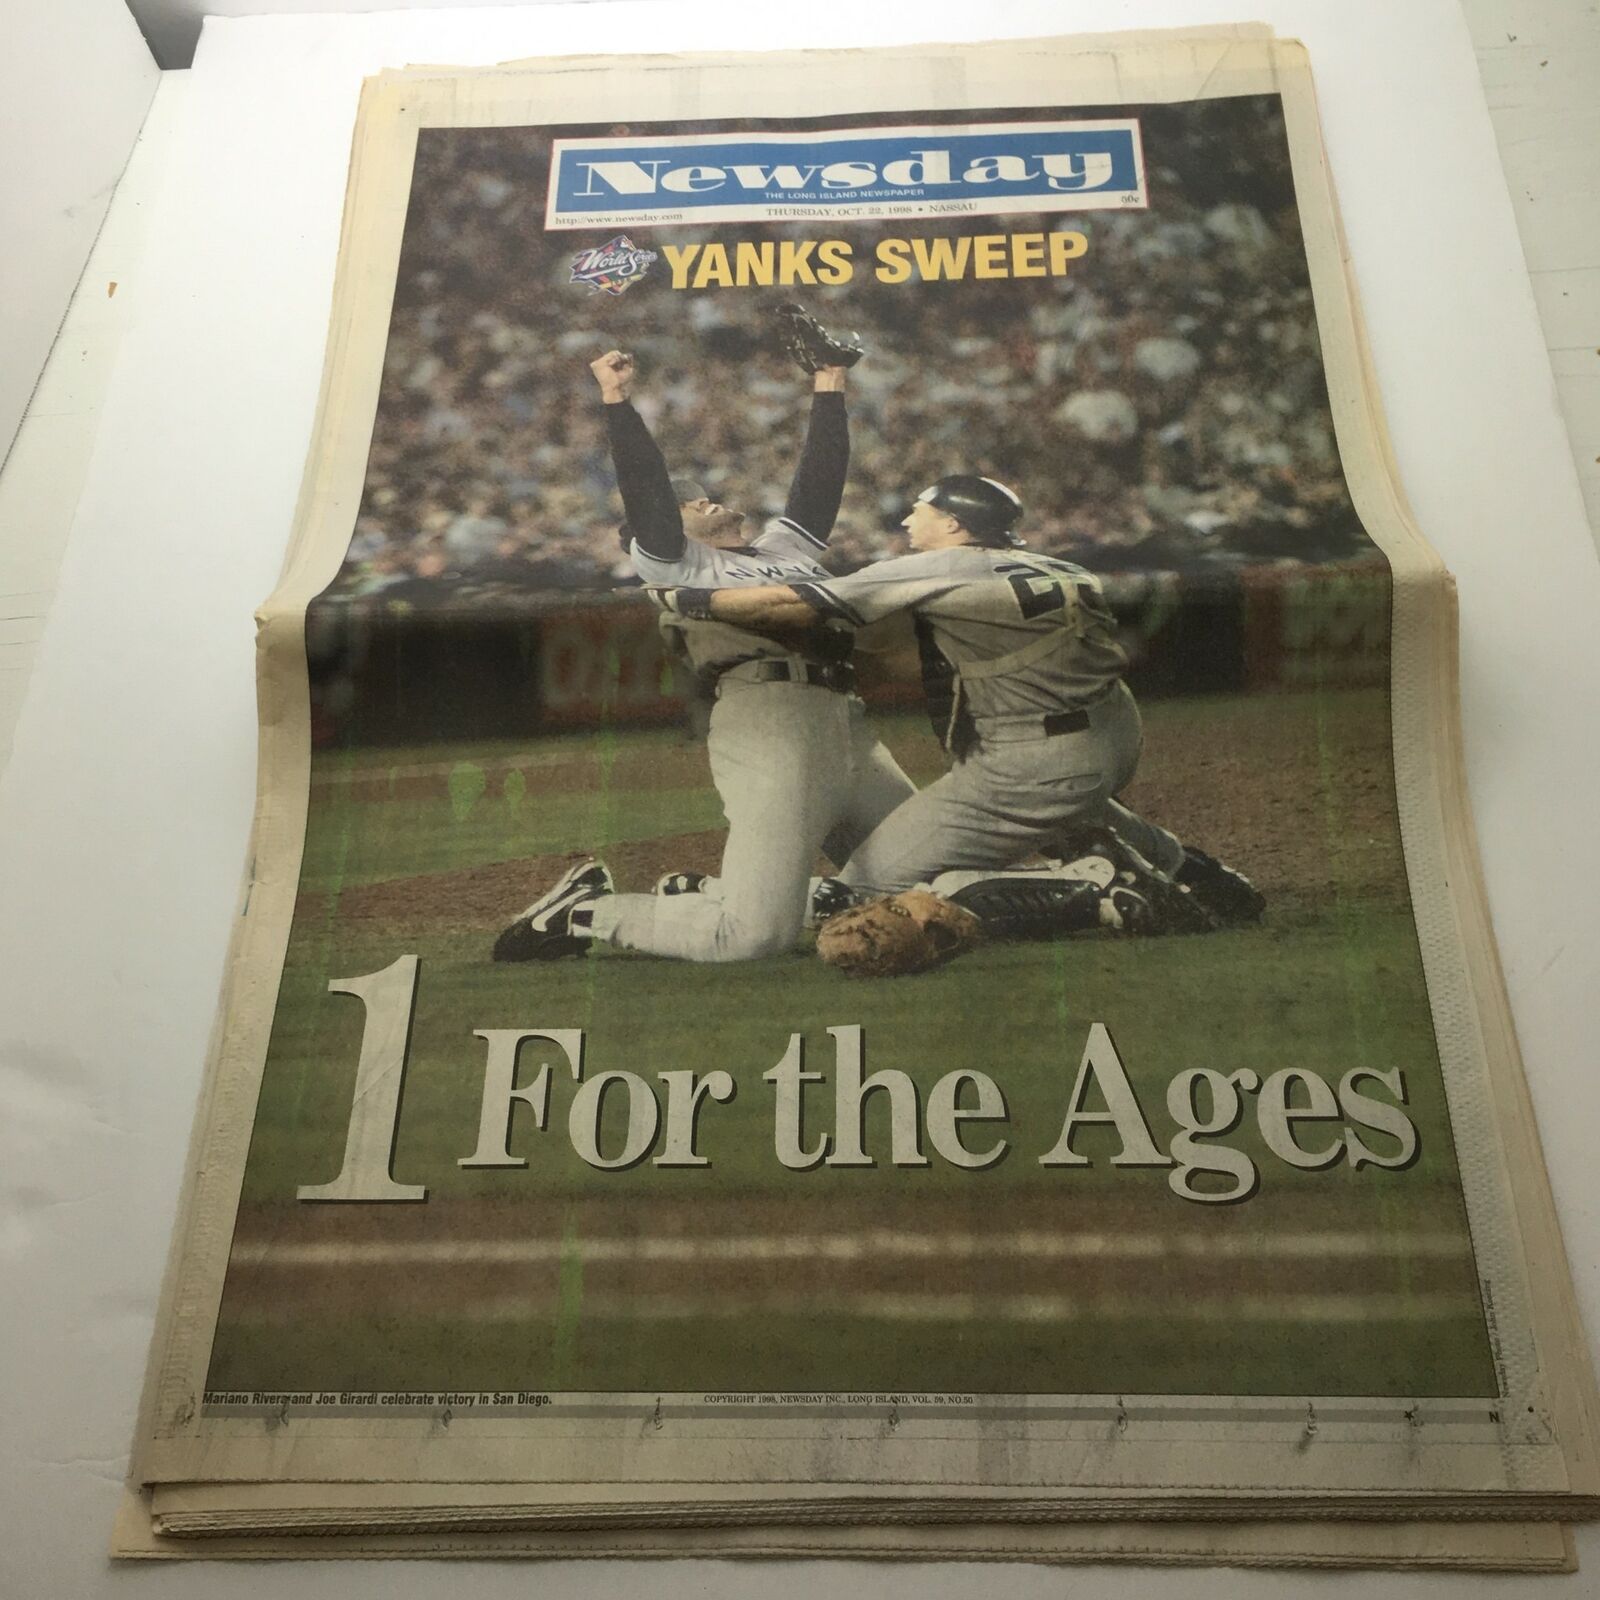 Newsday: Oct 22 1998 Yanks Sweep 1 For The Ages